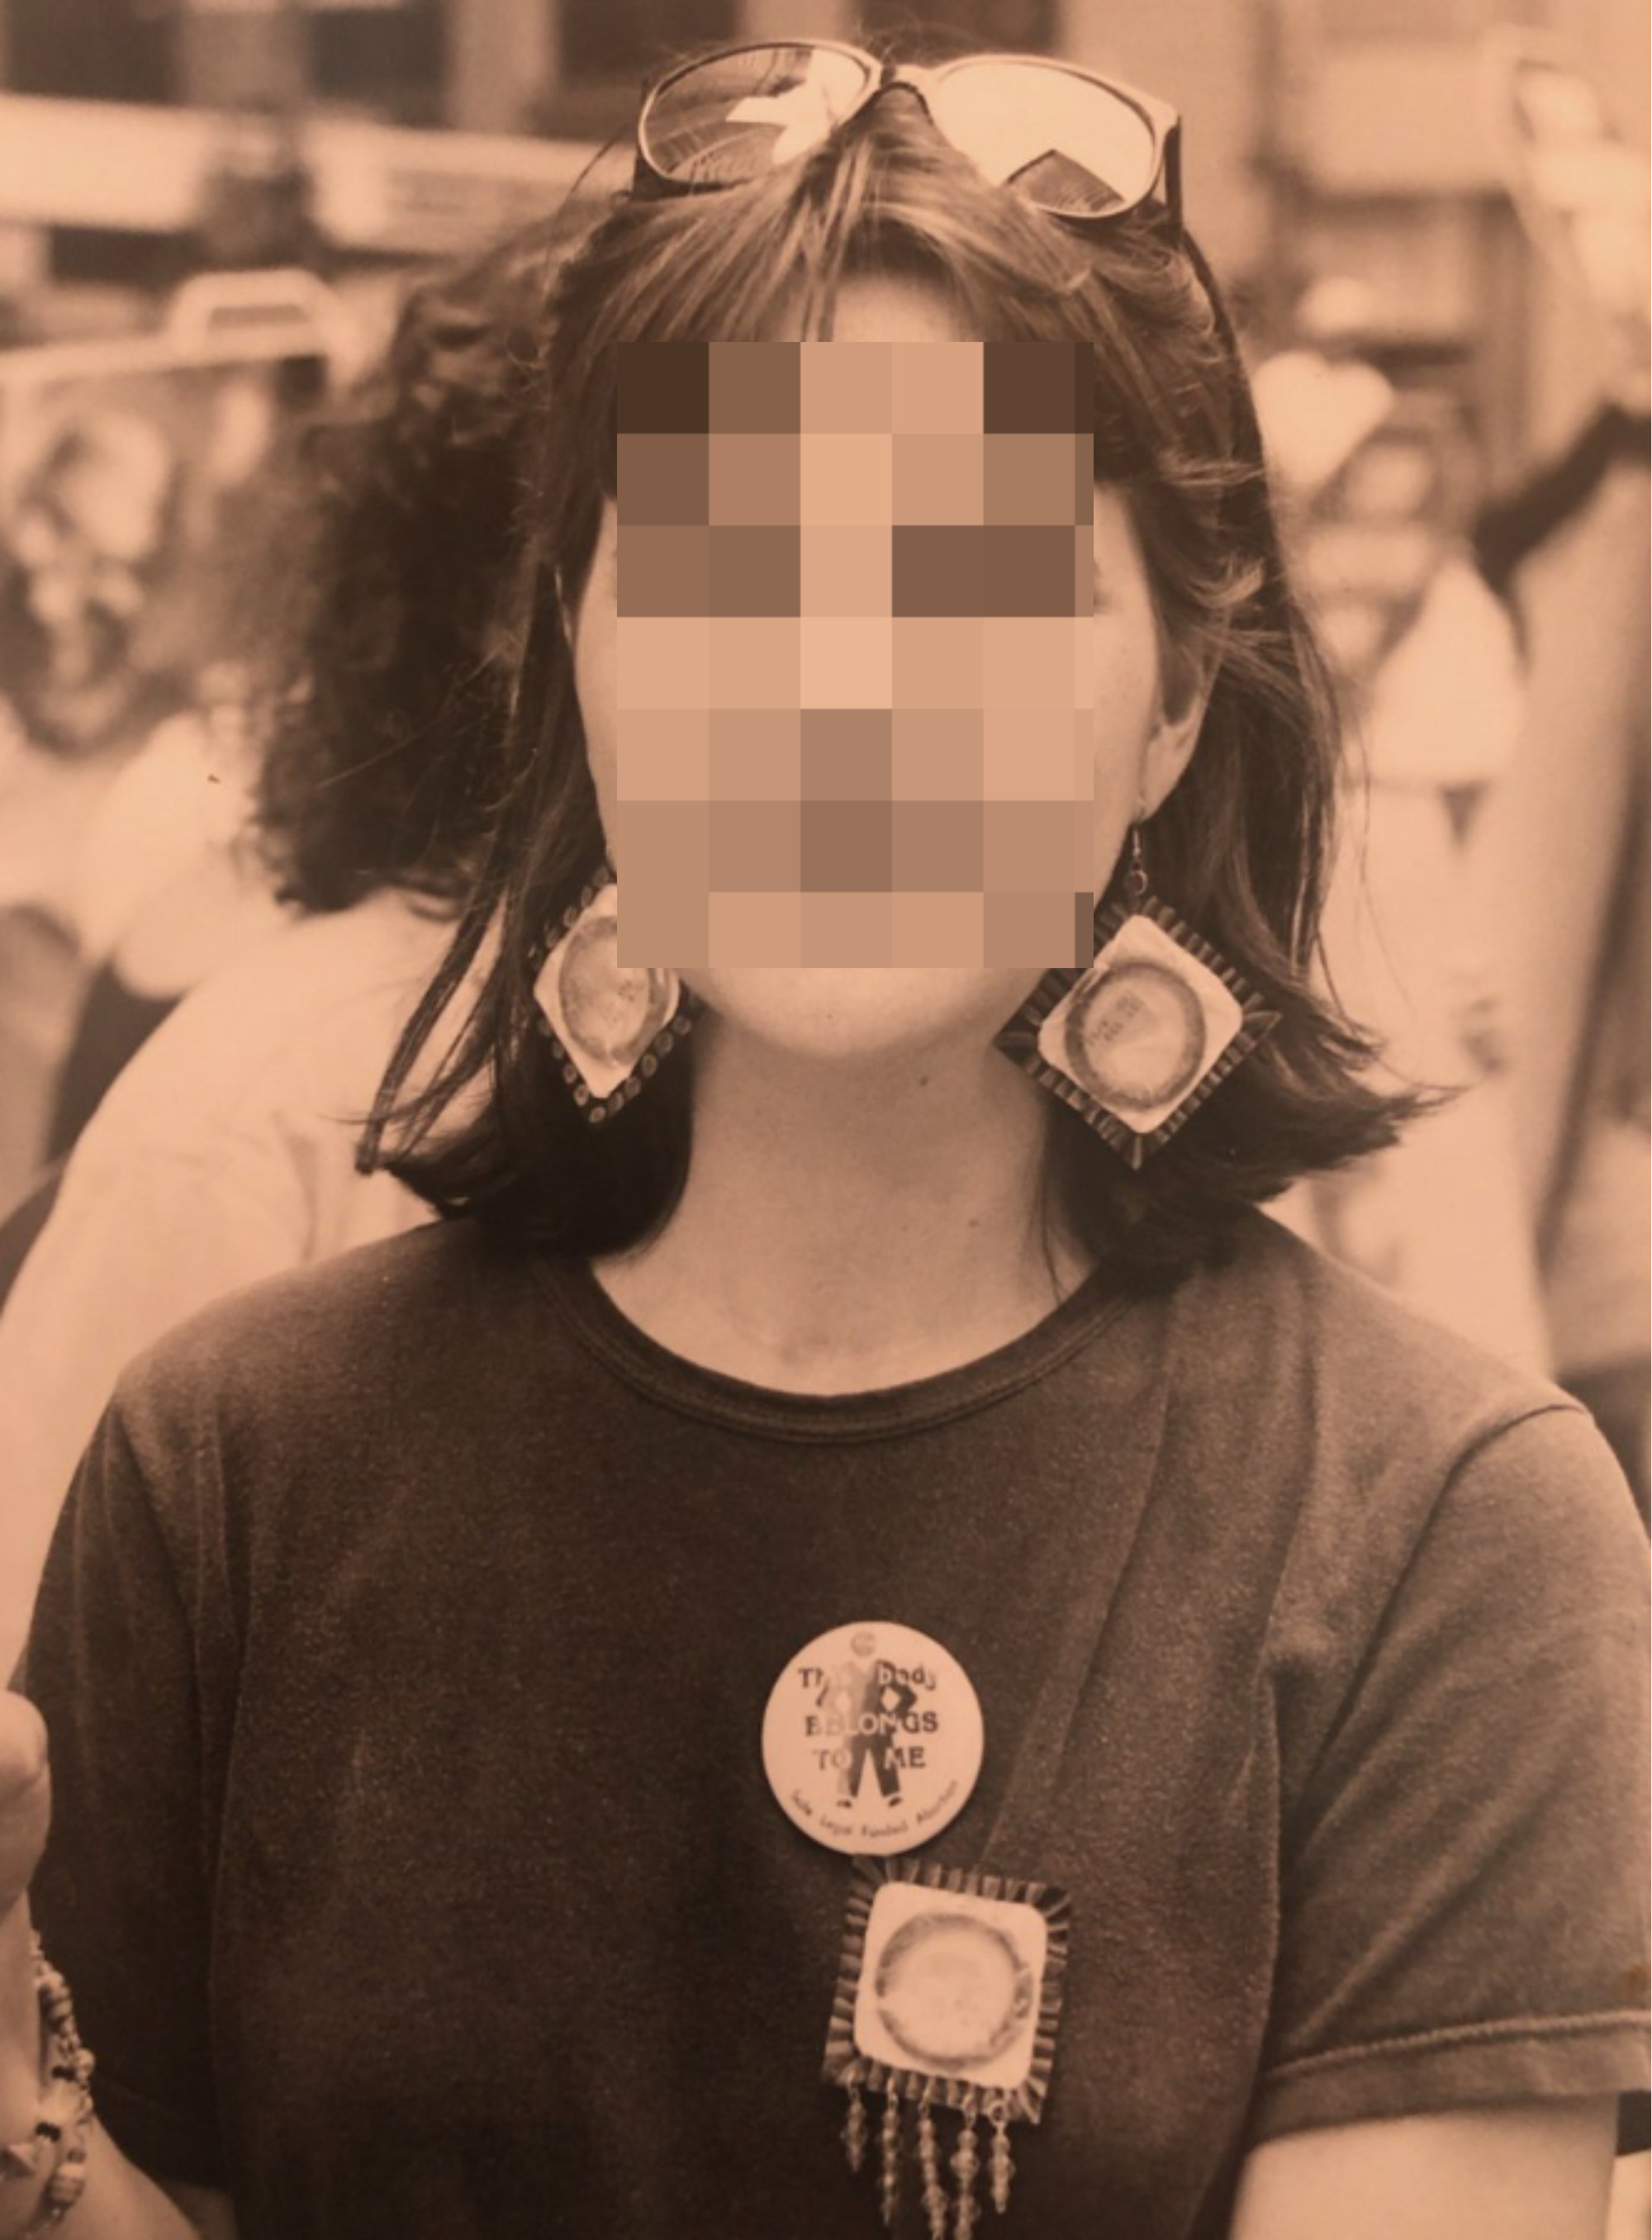 Woman with pixelated face showing condom earrings and pin